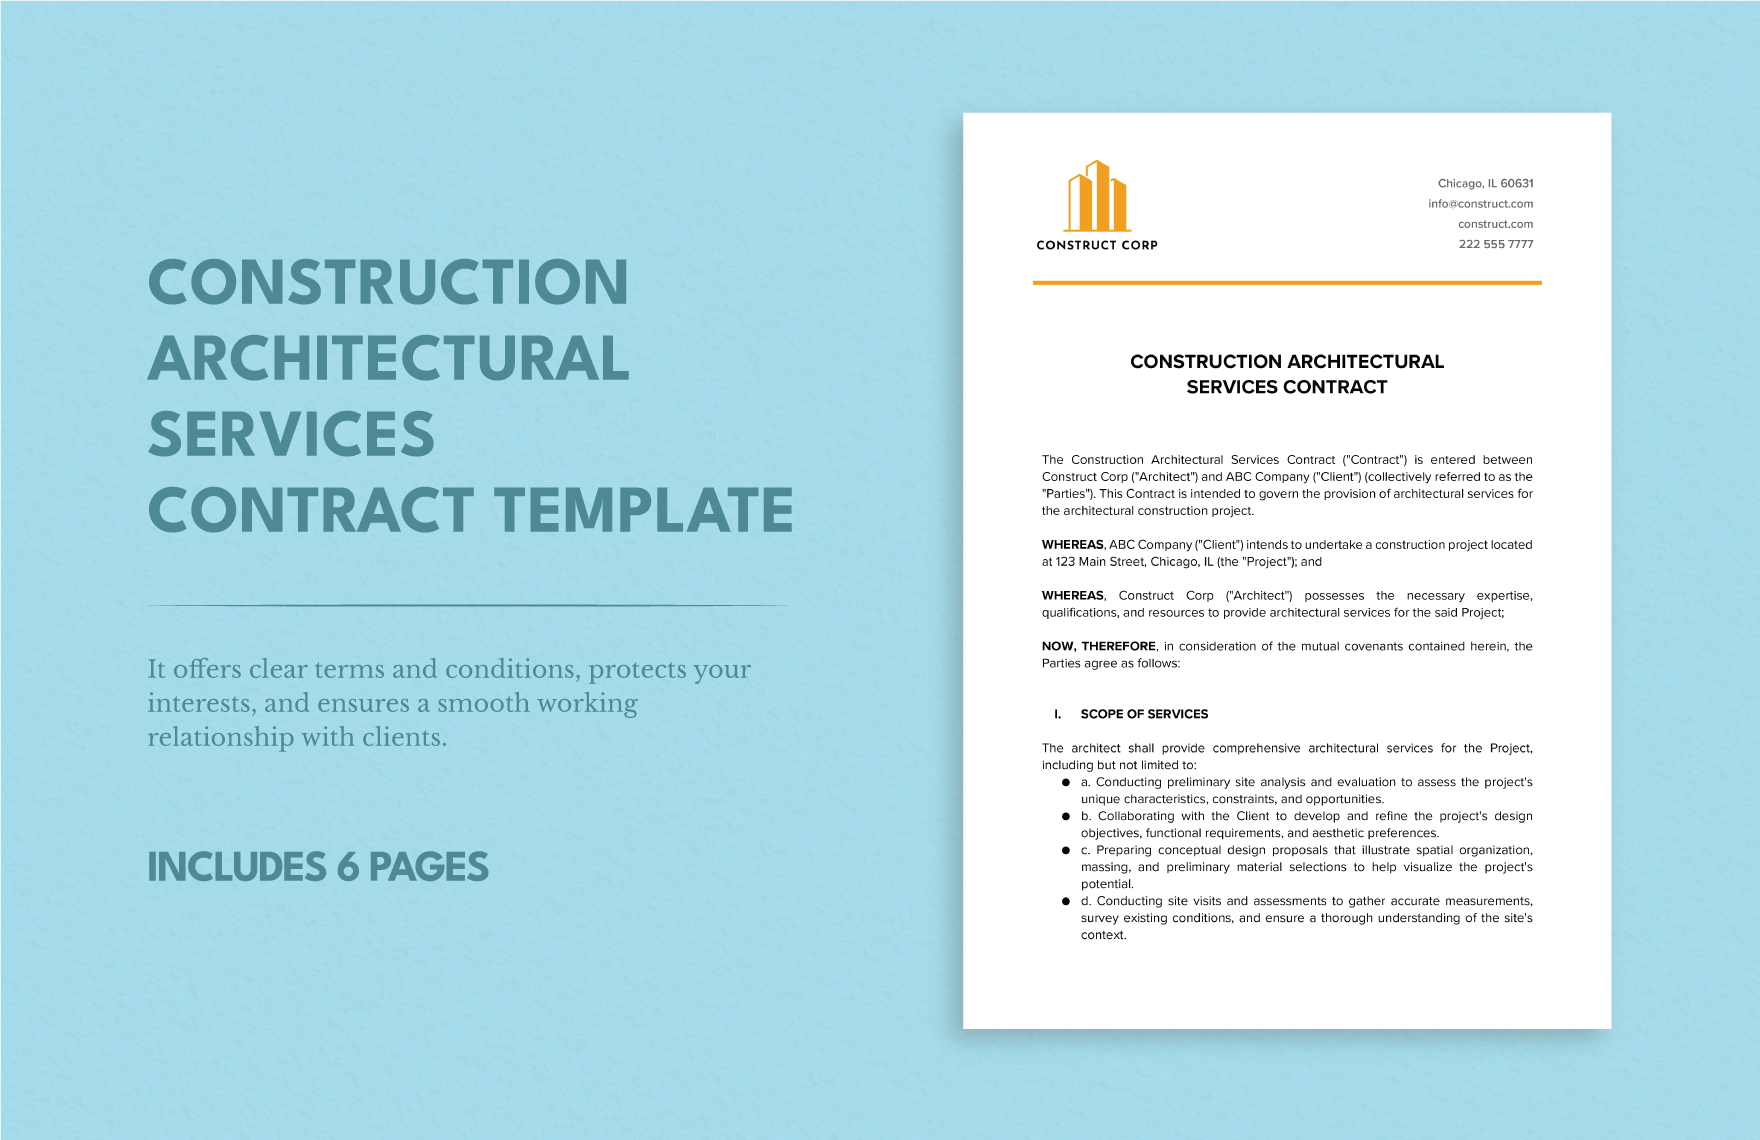 Construction Architectural Services Contract Template